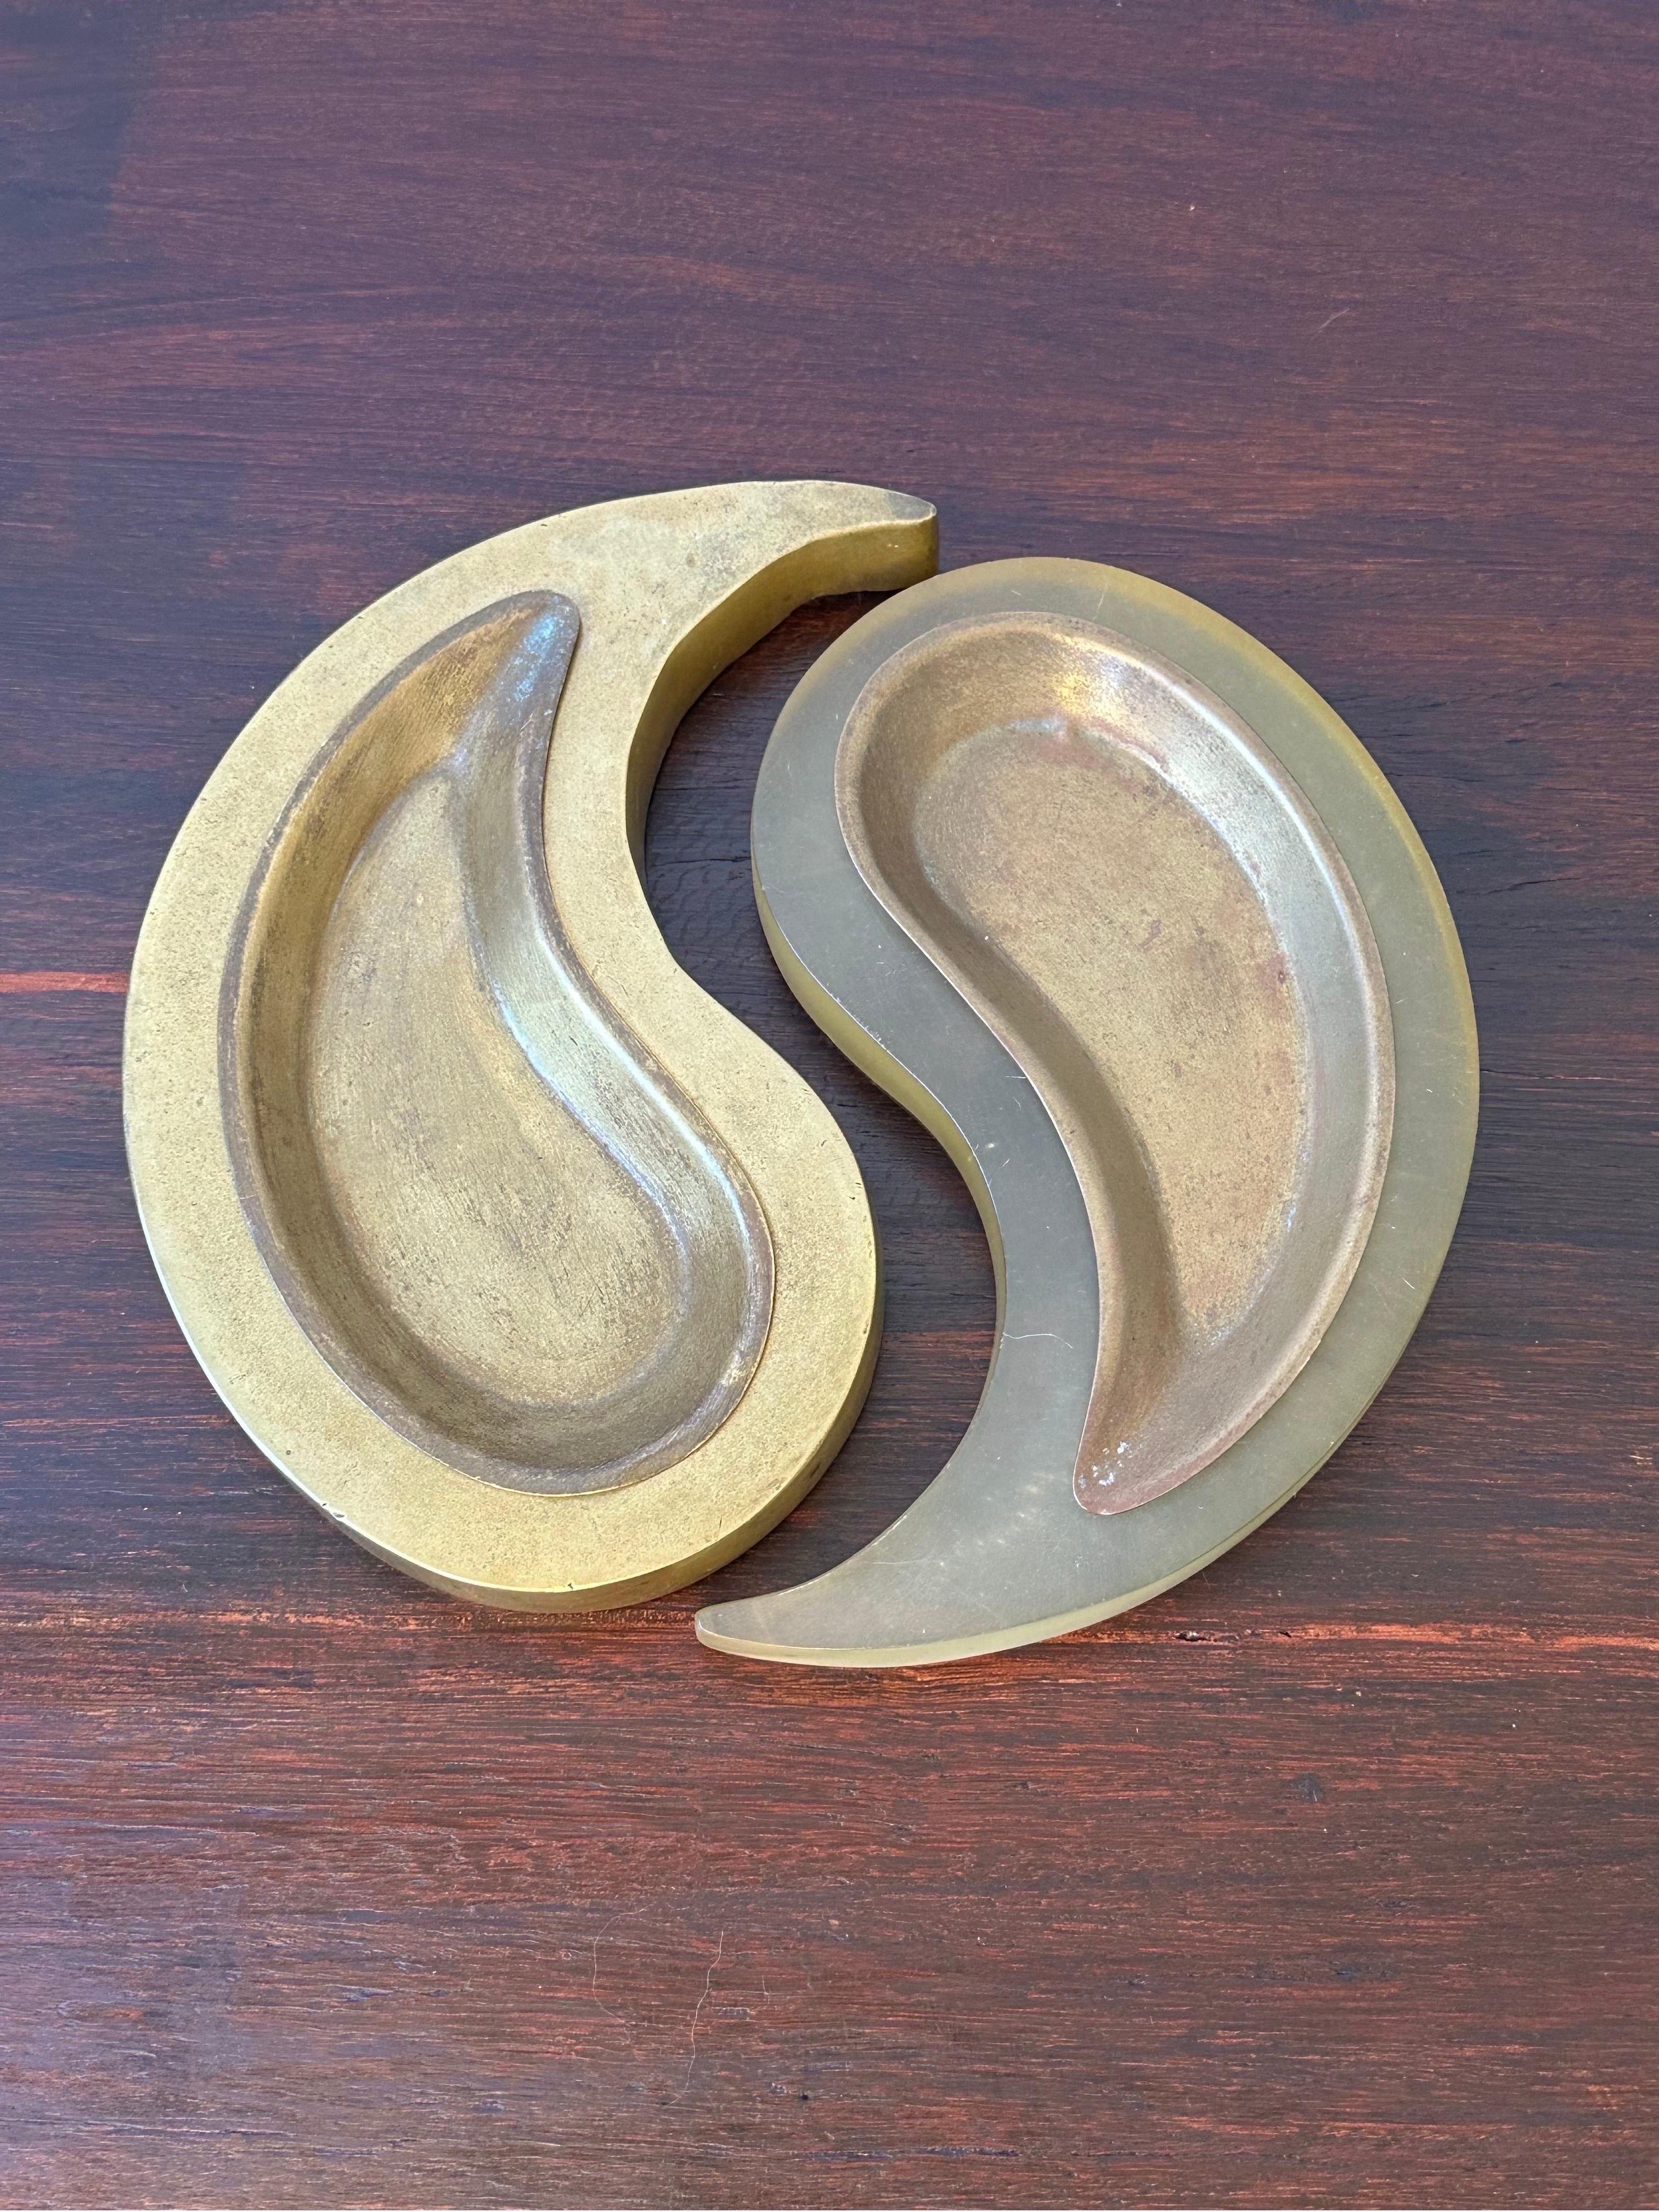 Brazilian modern ashtray or catch all with two interconnecting pieces representing yin and yang.  One part is solid bronze while the other is acrylic and both have removable bronze trays.